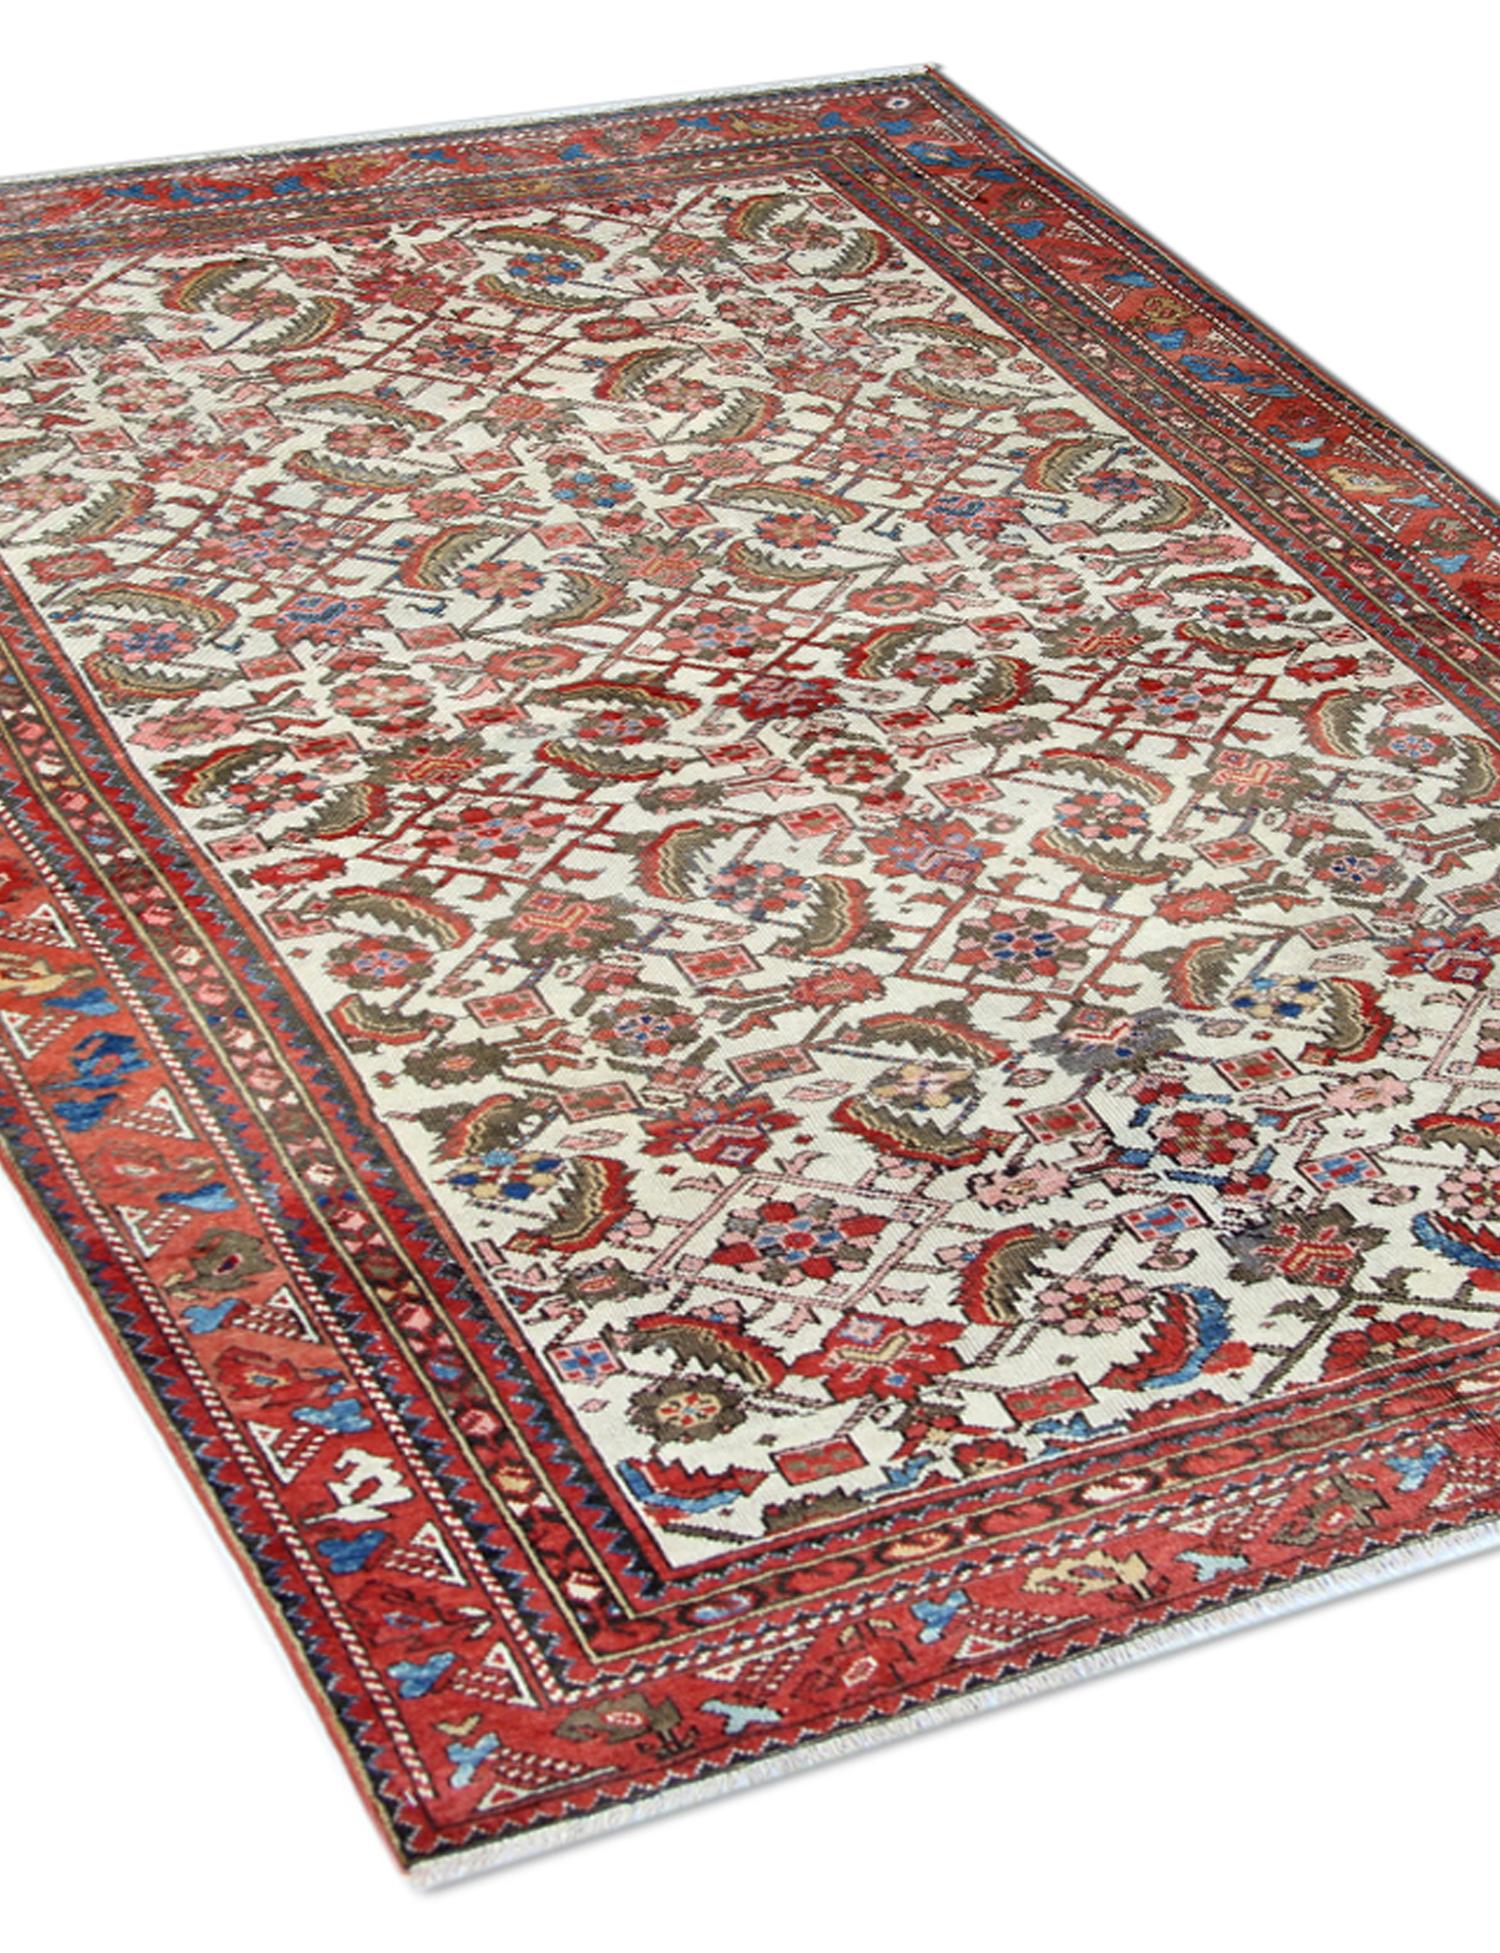 Handwoven with rich red and brown colours on an ivory background, the design features an intricate motif pattern that distinguishes this antique Malayer rug. A blend of oriental inspiration and tribal elements creates a unique, dynamic aesthetic in